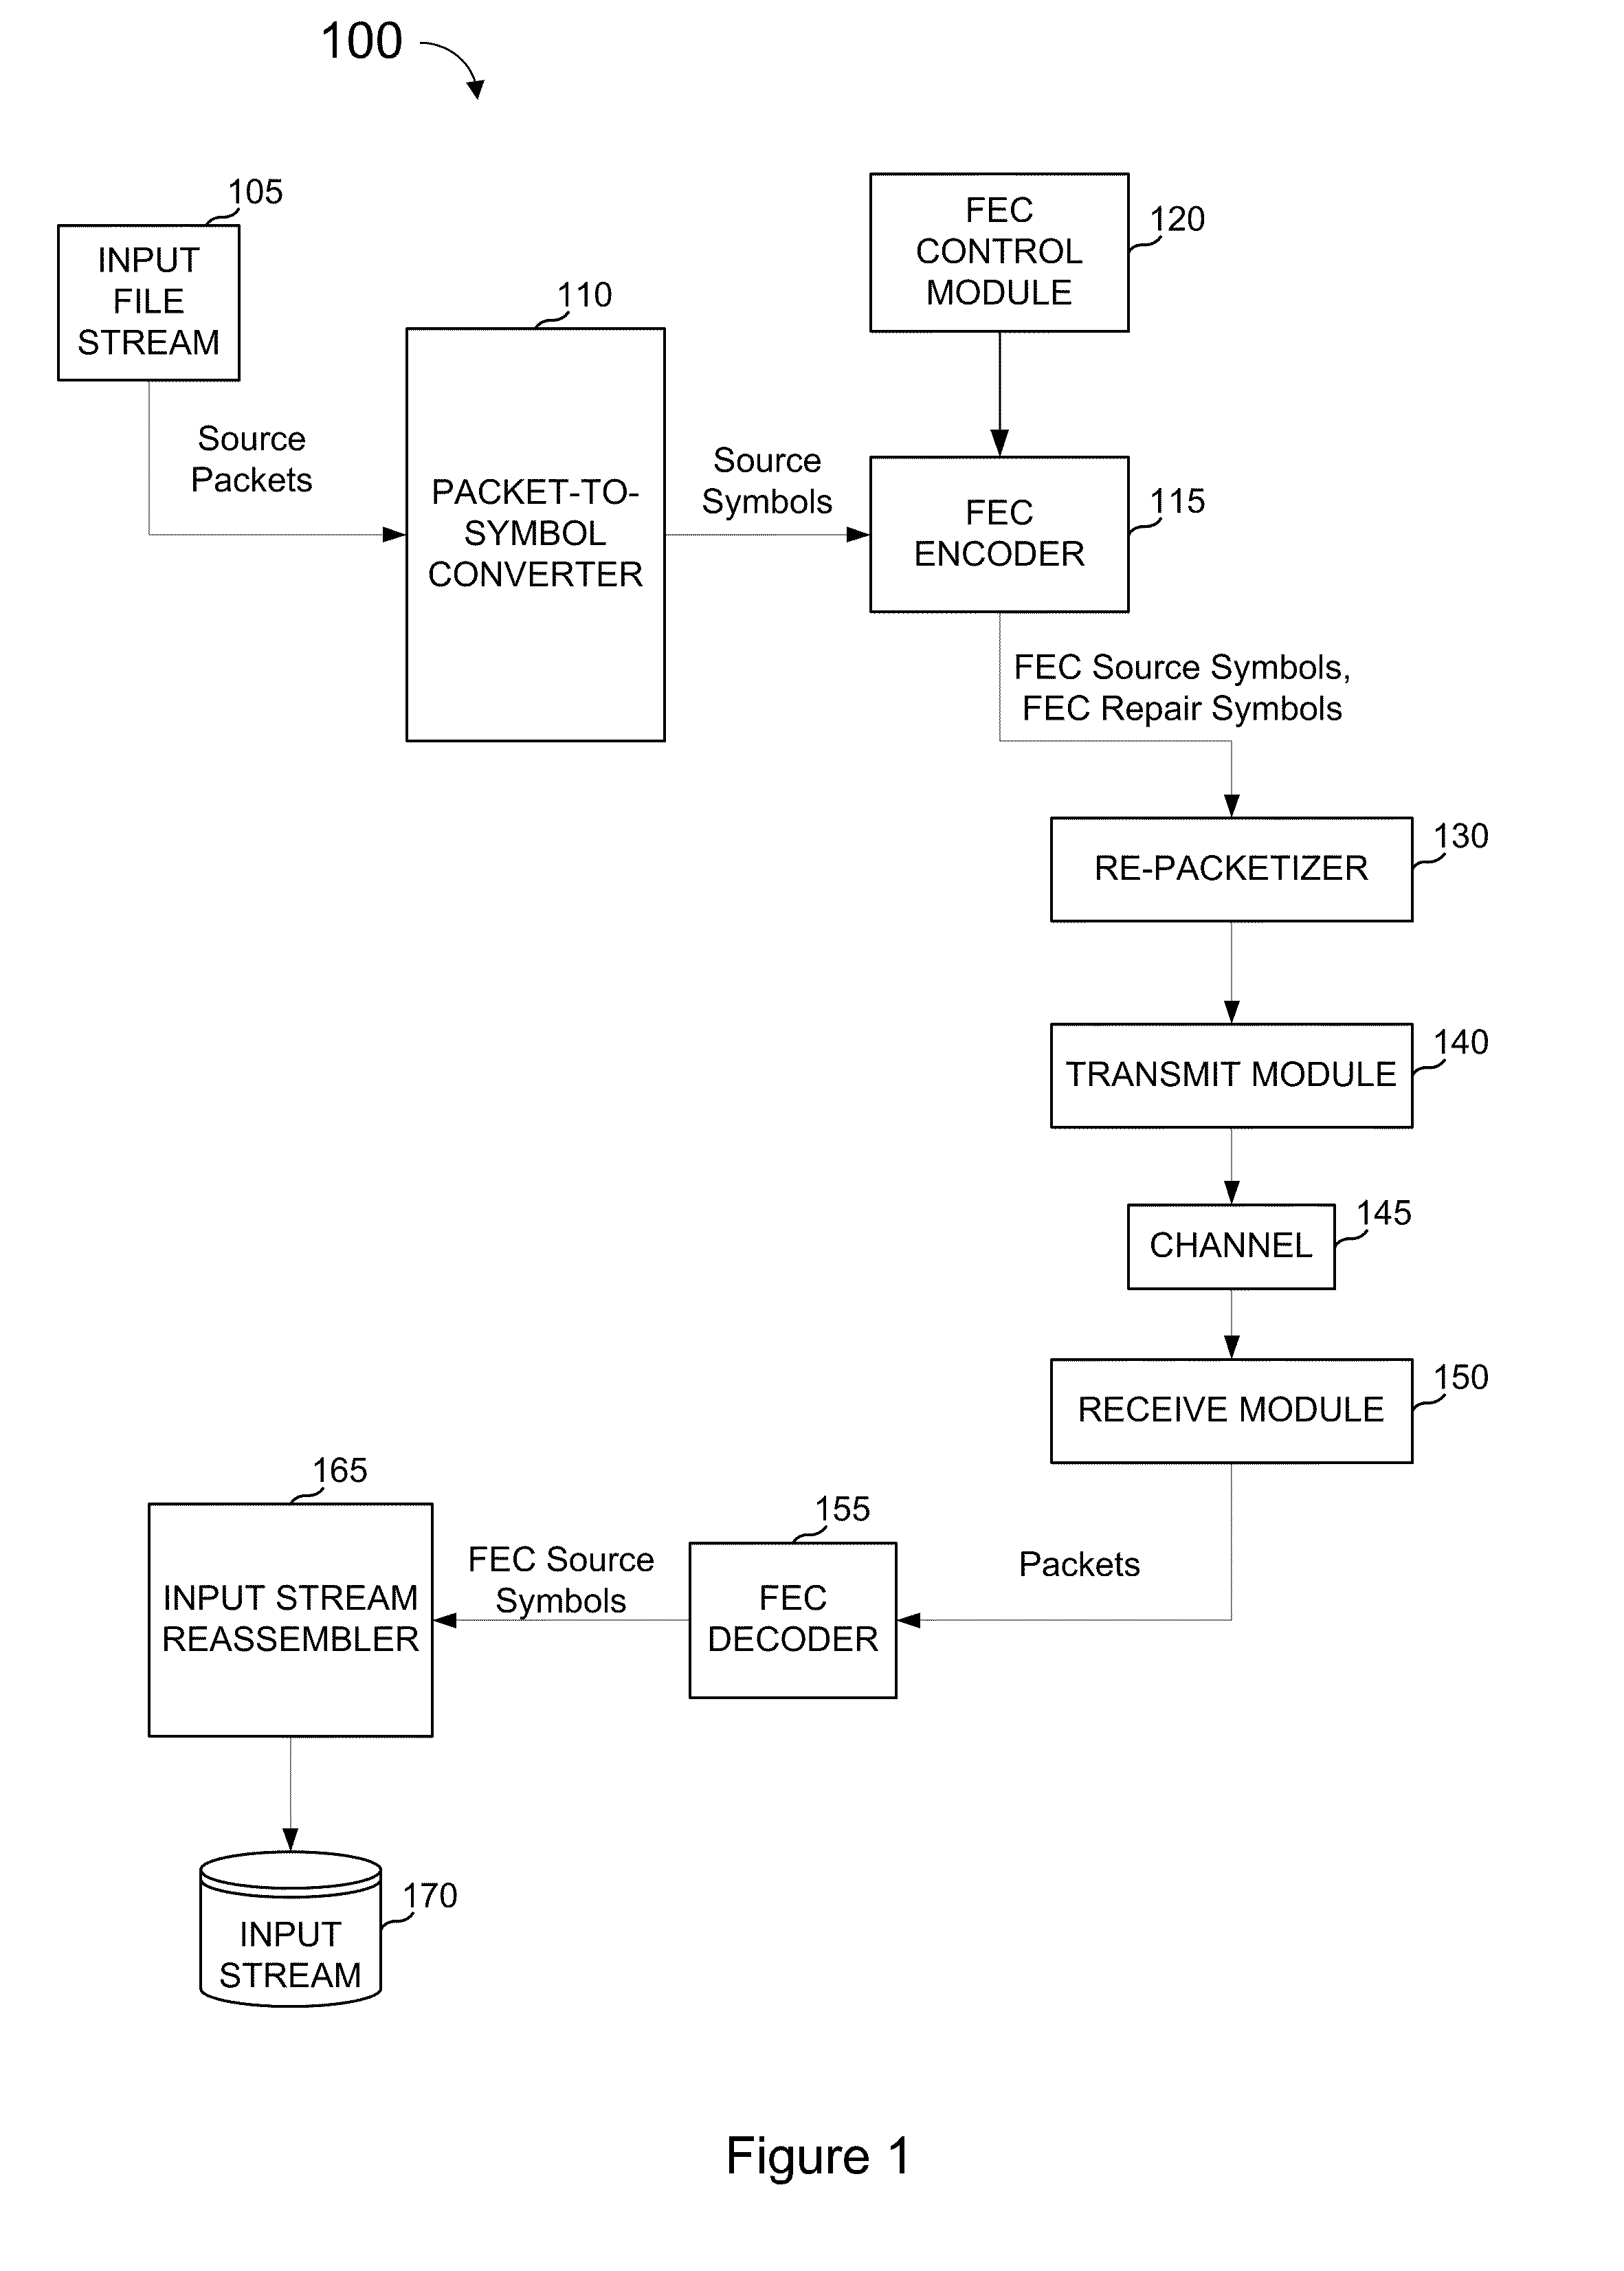 Fec architecture for streaming services including symbol based operations and packet tagging